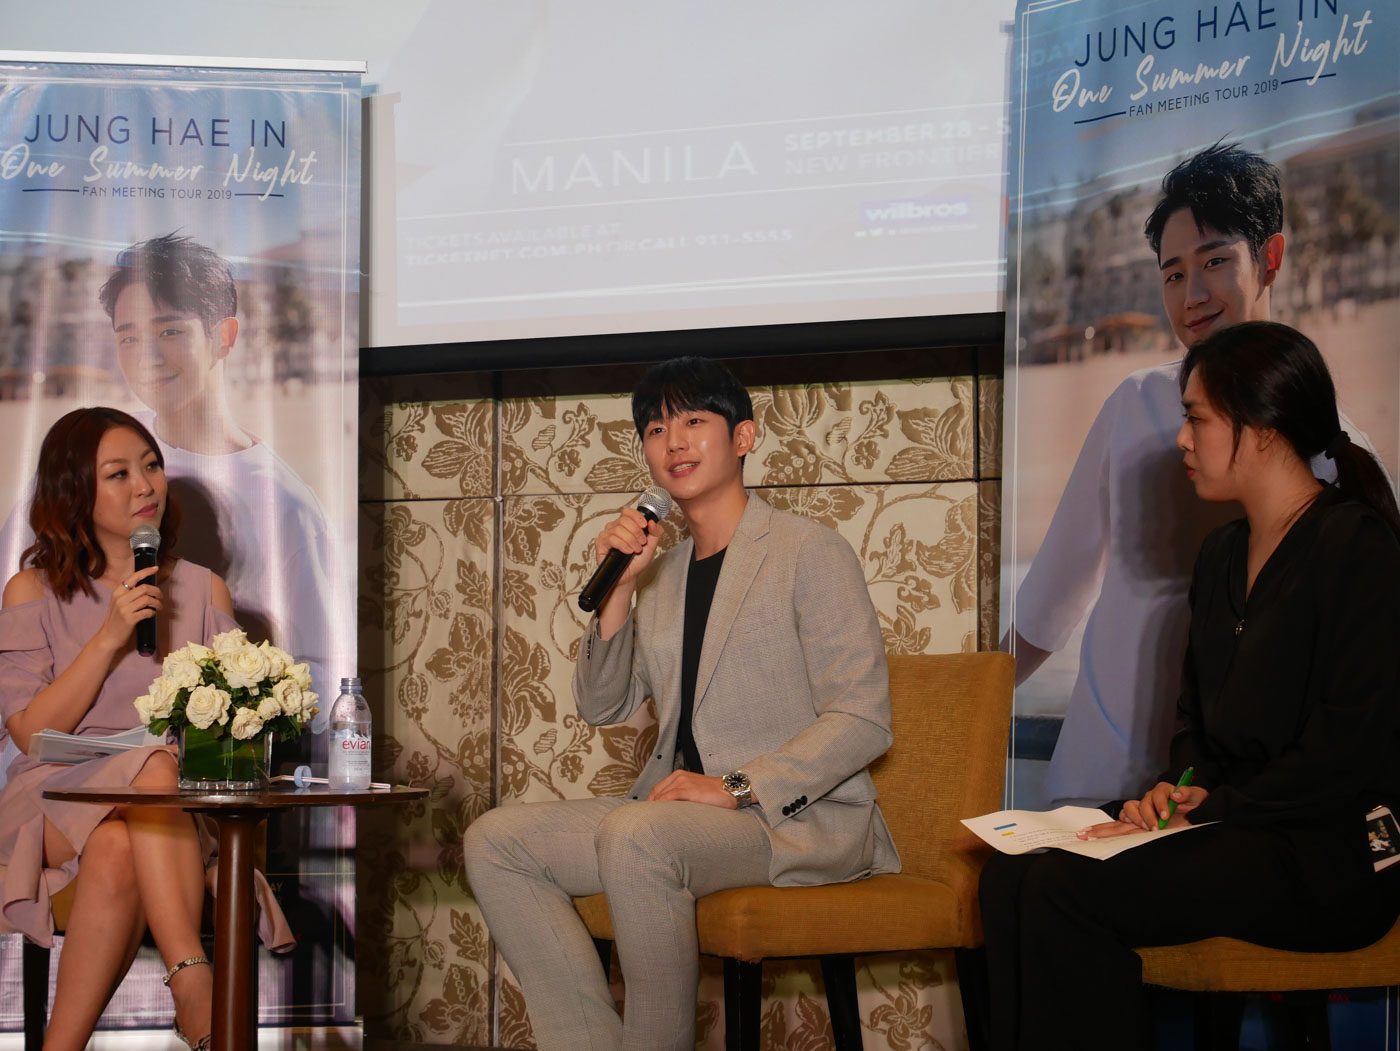 RELUCTANT HALLYU STAR. Korean actor Jung Hae-in answers questions at his press conference on Friday, September 27, for his fan meet 'One Summer Night.' Photo by Nikko Dizon/Rappler   